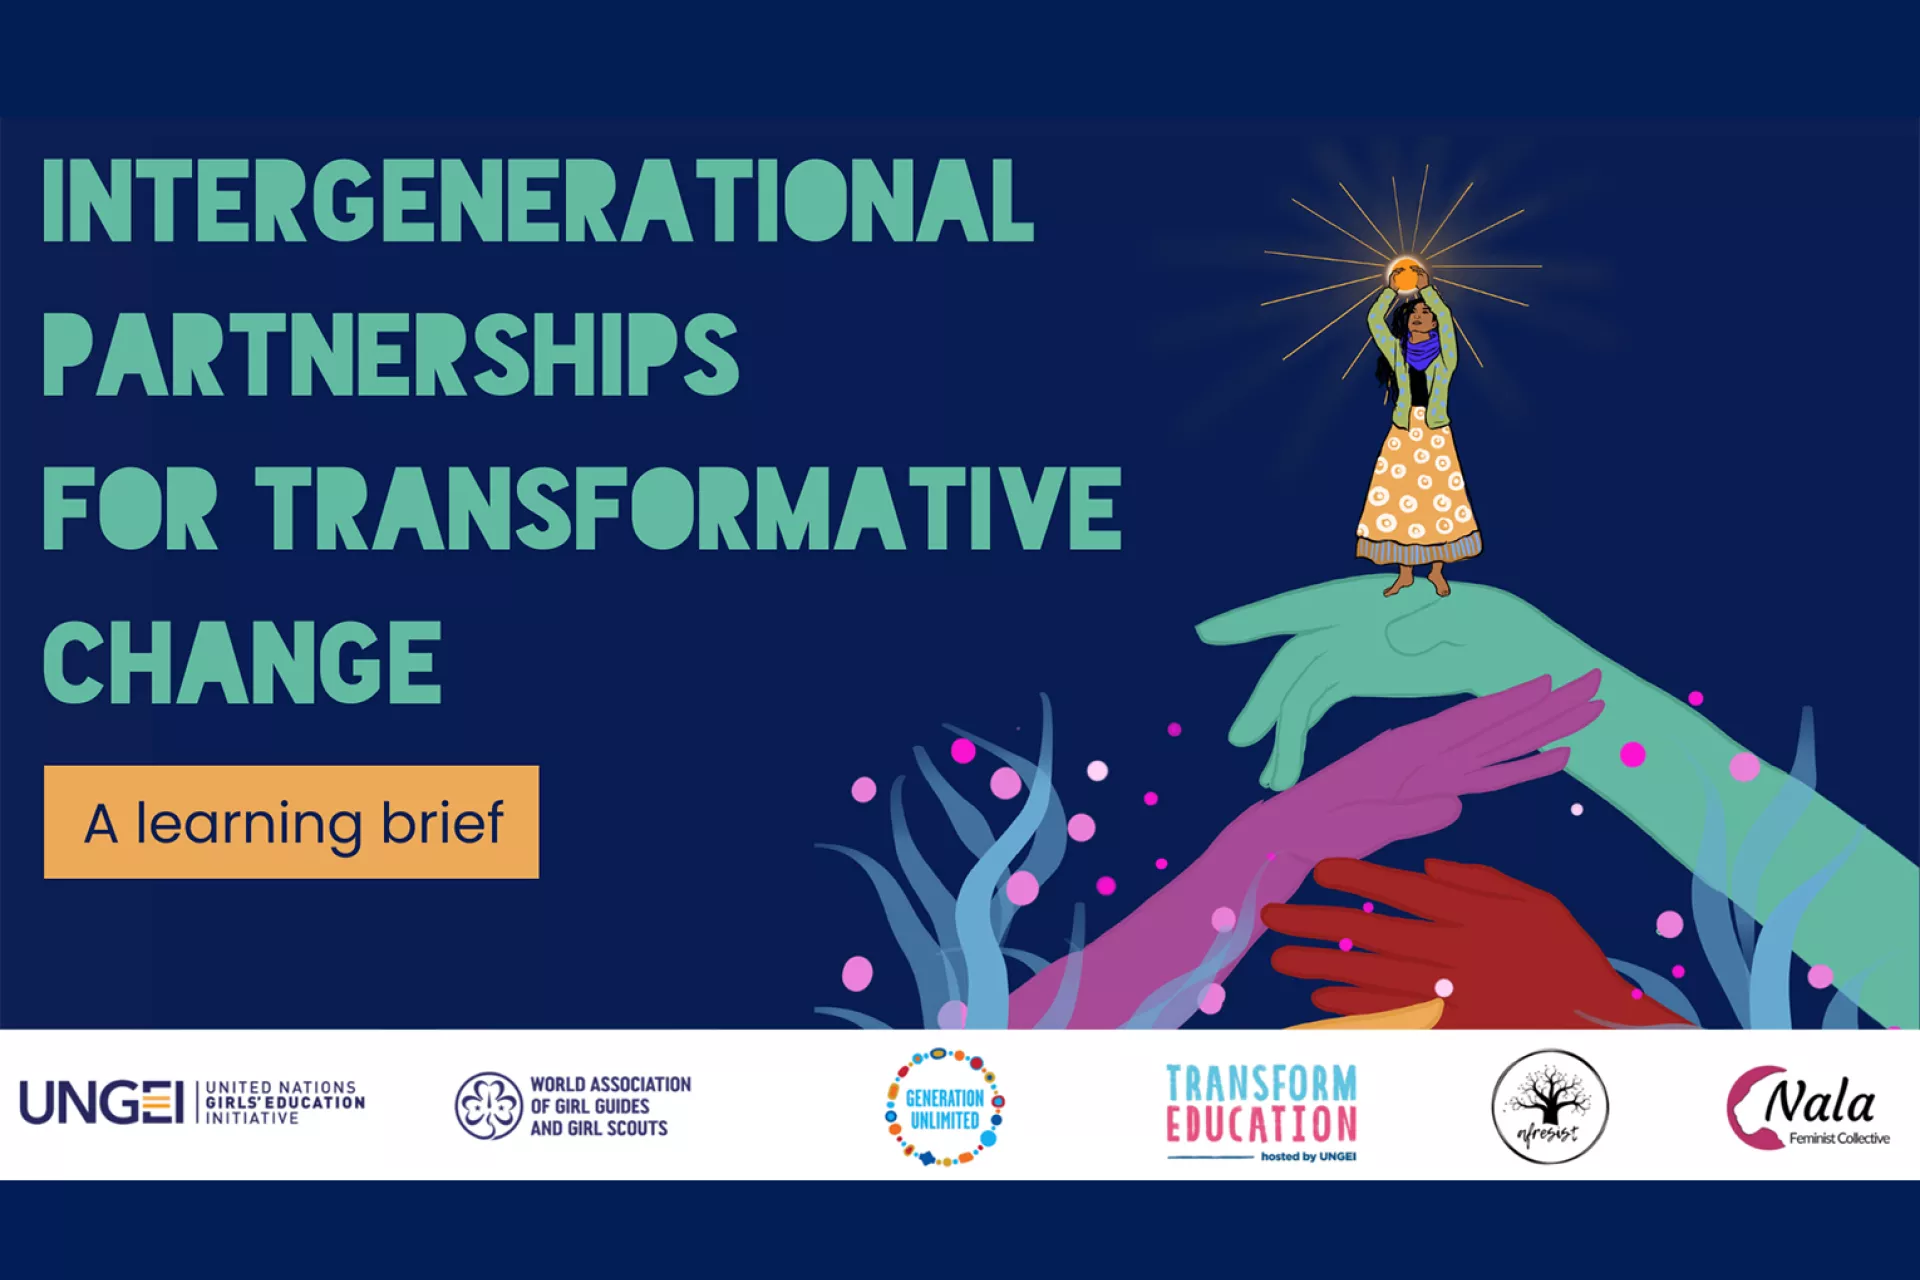 Main Graphic with "Intergenerational Partnerships for Transformative Change" inscription